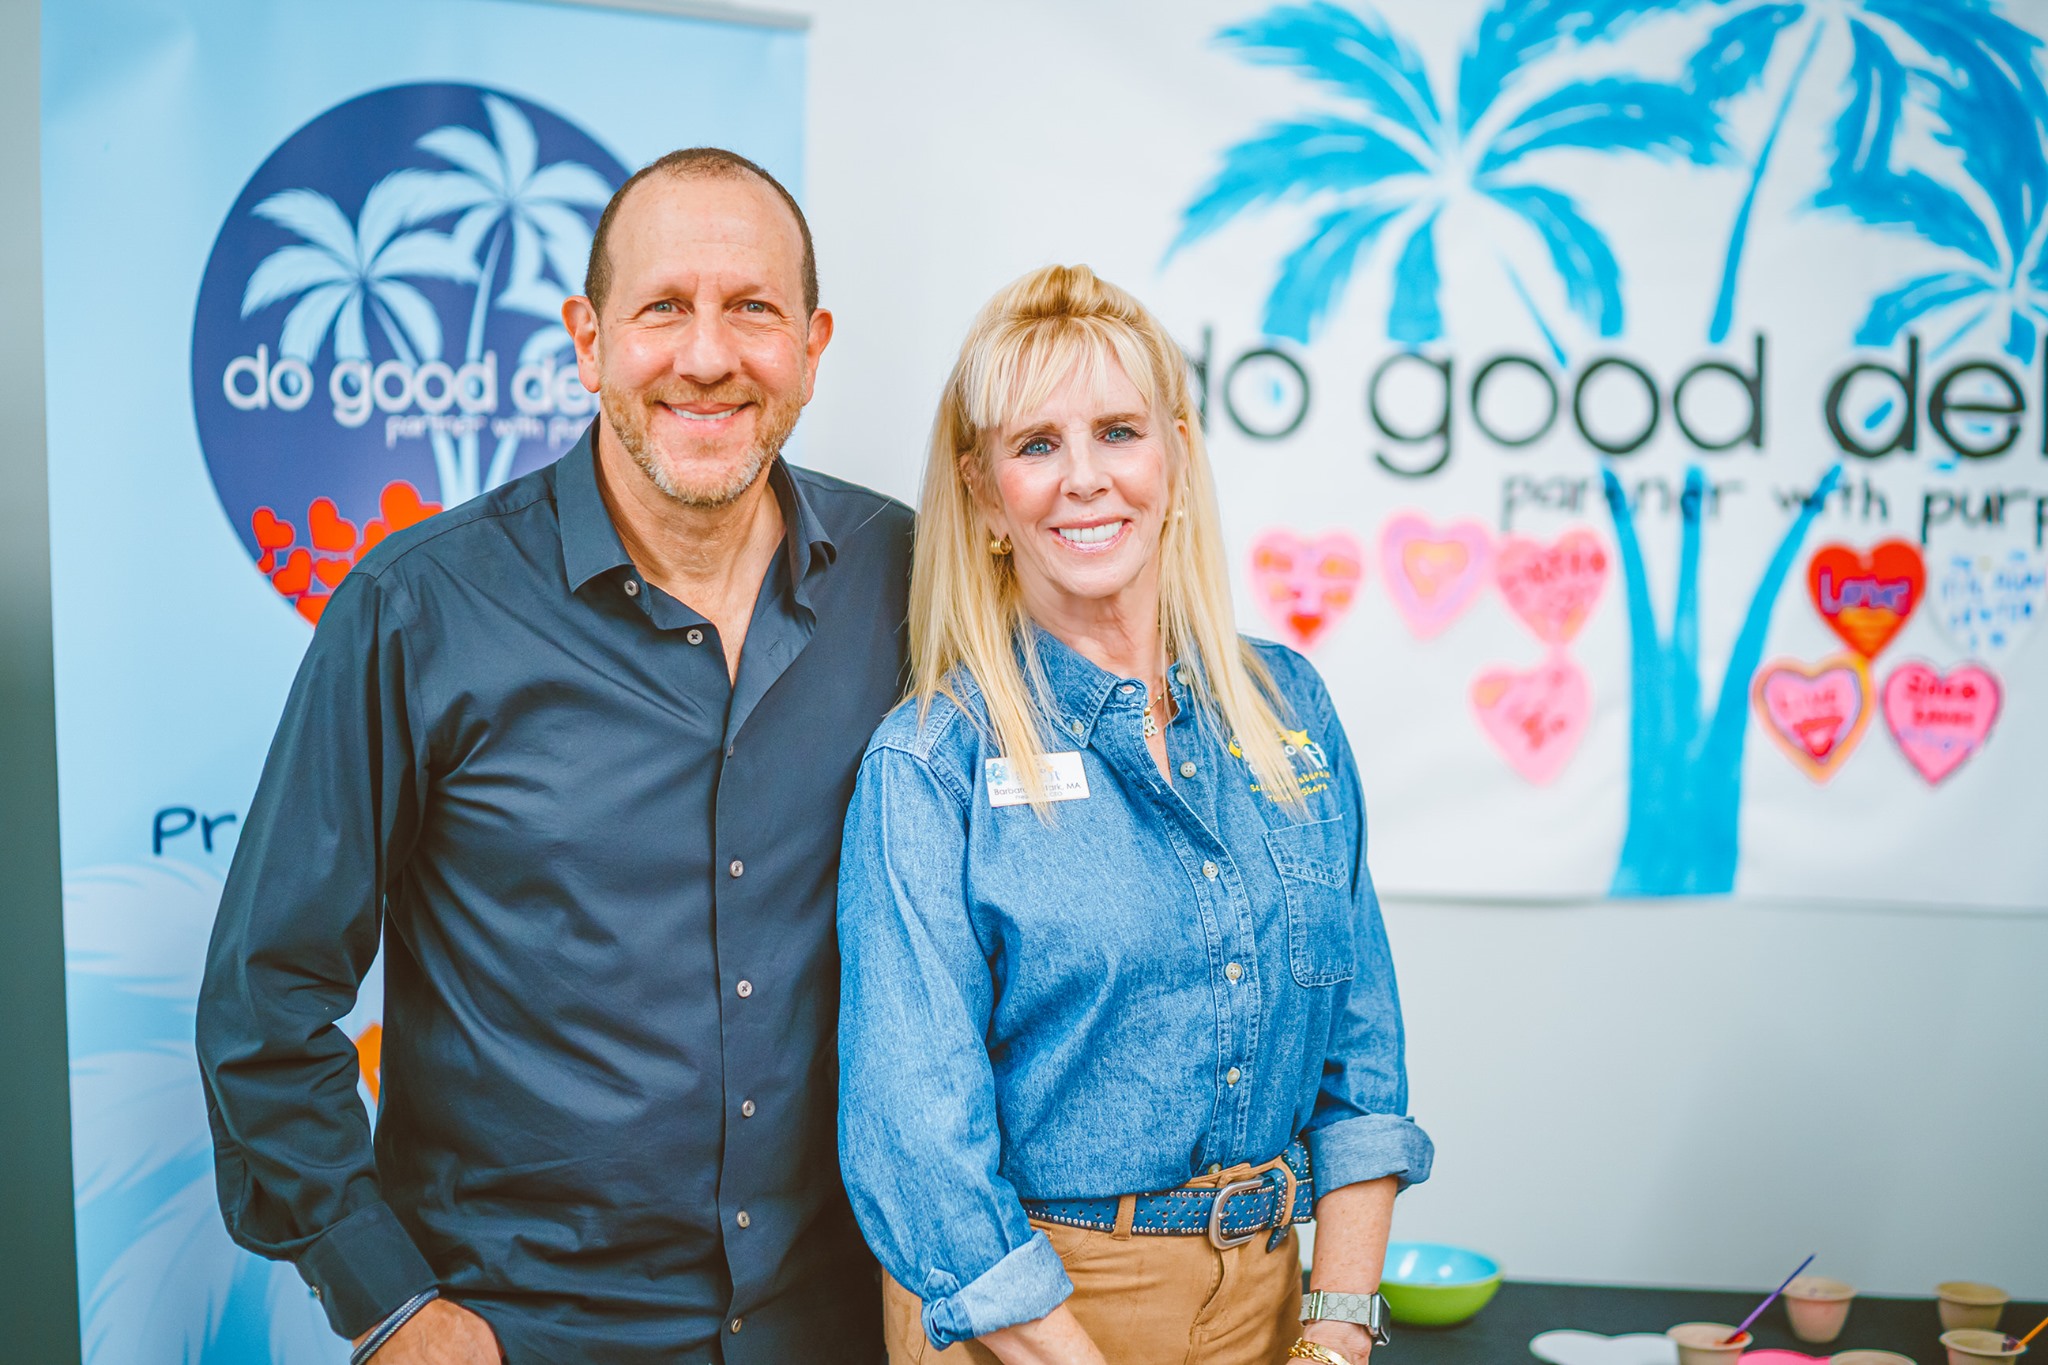 Rose Marcom to Raise Funds for Milagro Center through Do Good Delray Event